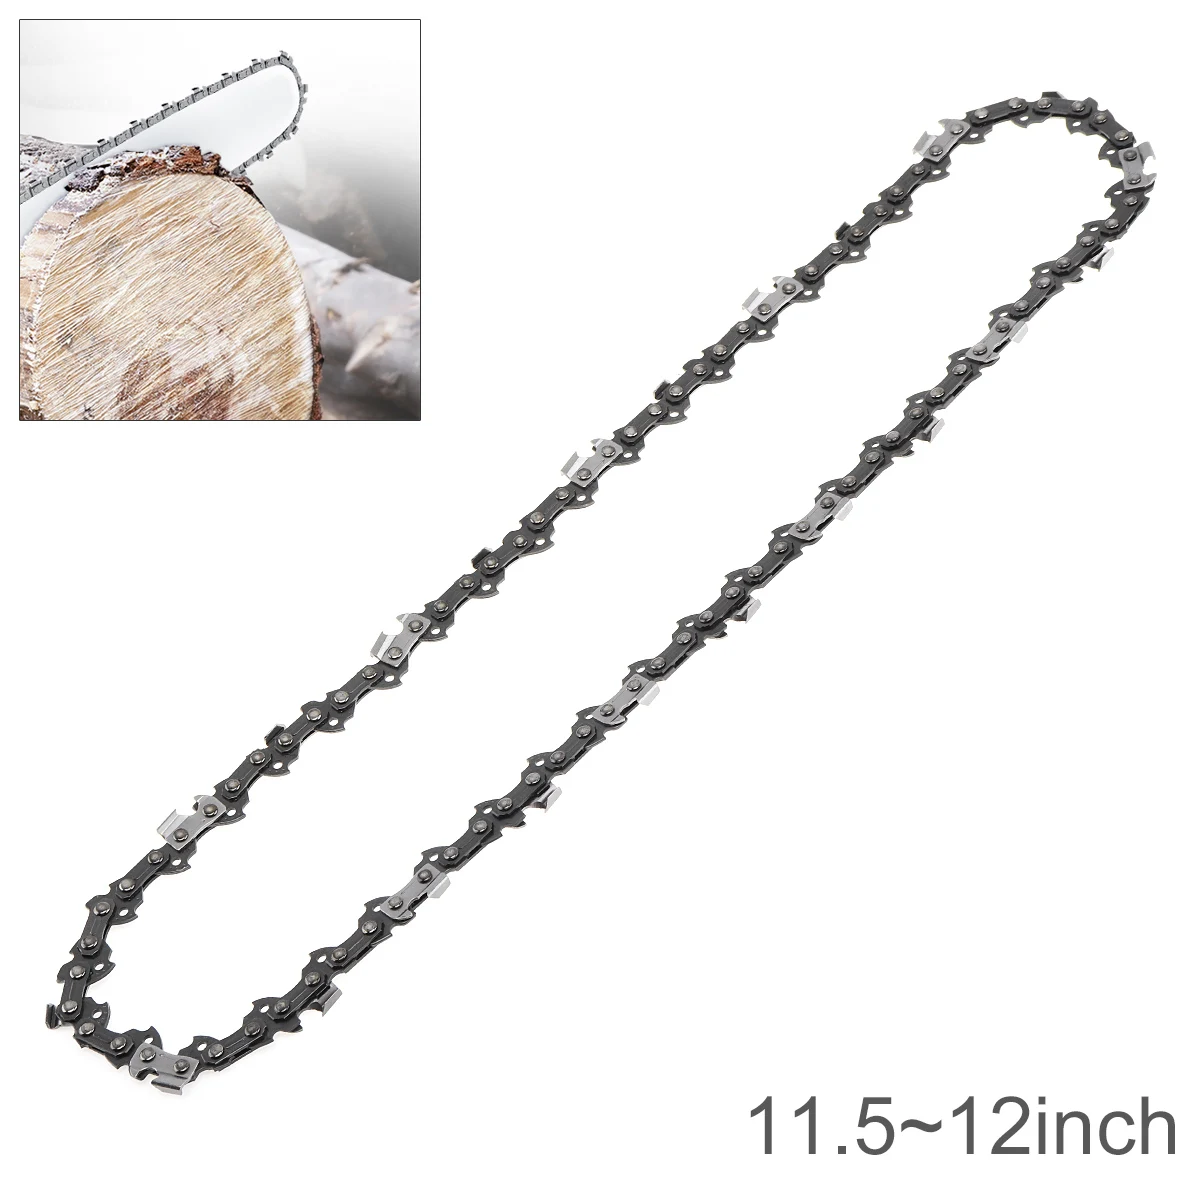 11.5-12'' Chainsaw Chain Blade Wood Cutting Chainsaw Parts 50-52 Drive 3/8 Pitch Chainsaw Saw Mill Chain Tool Accessories 1pc 12 14 16 chainsaw chain 3 8 pitch saw chain 45 52 56 drive links for electric chainsaw spare parts replacement chainsaw